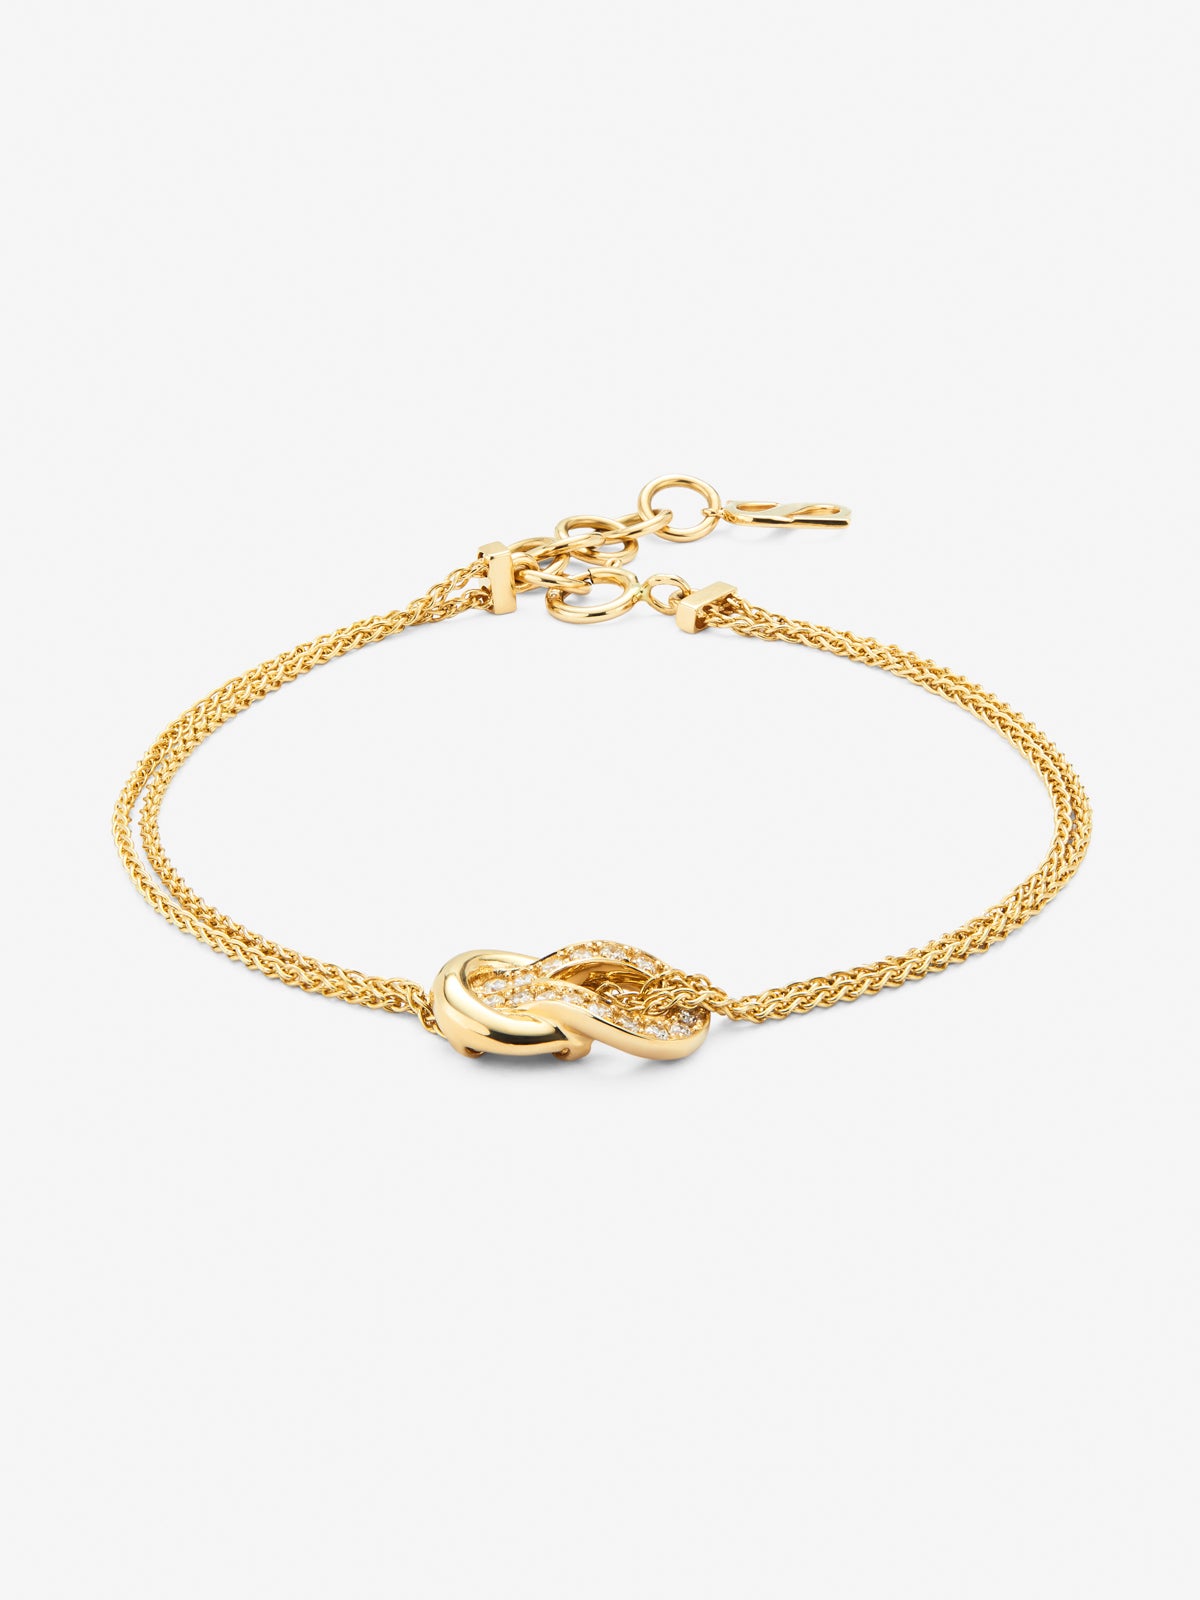 18K yellow gold bracelet with white diamonds of 0.15 cts and knot shape